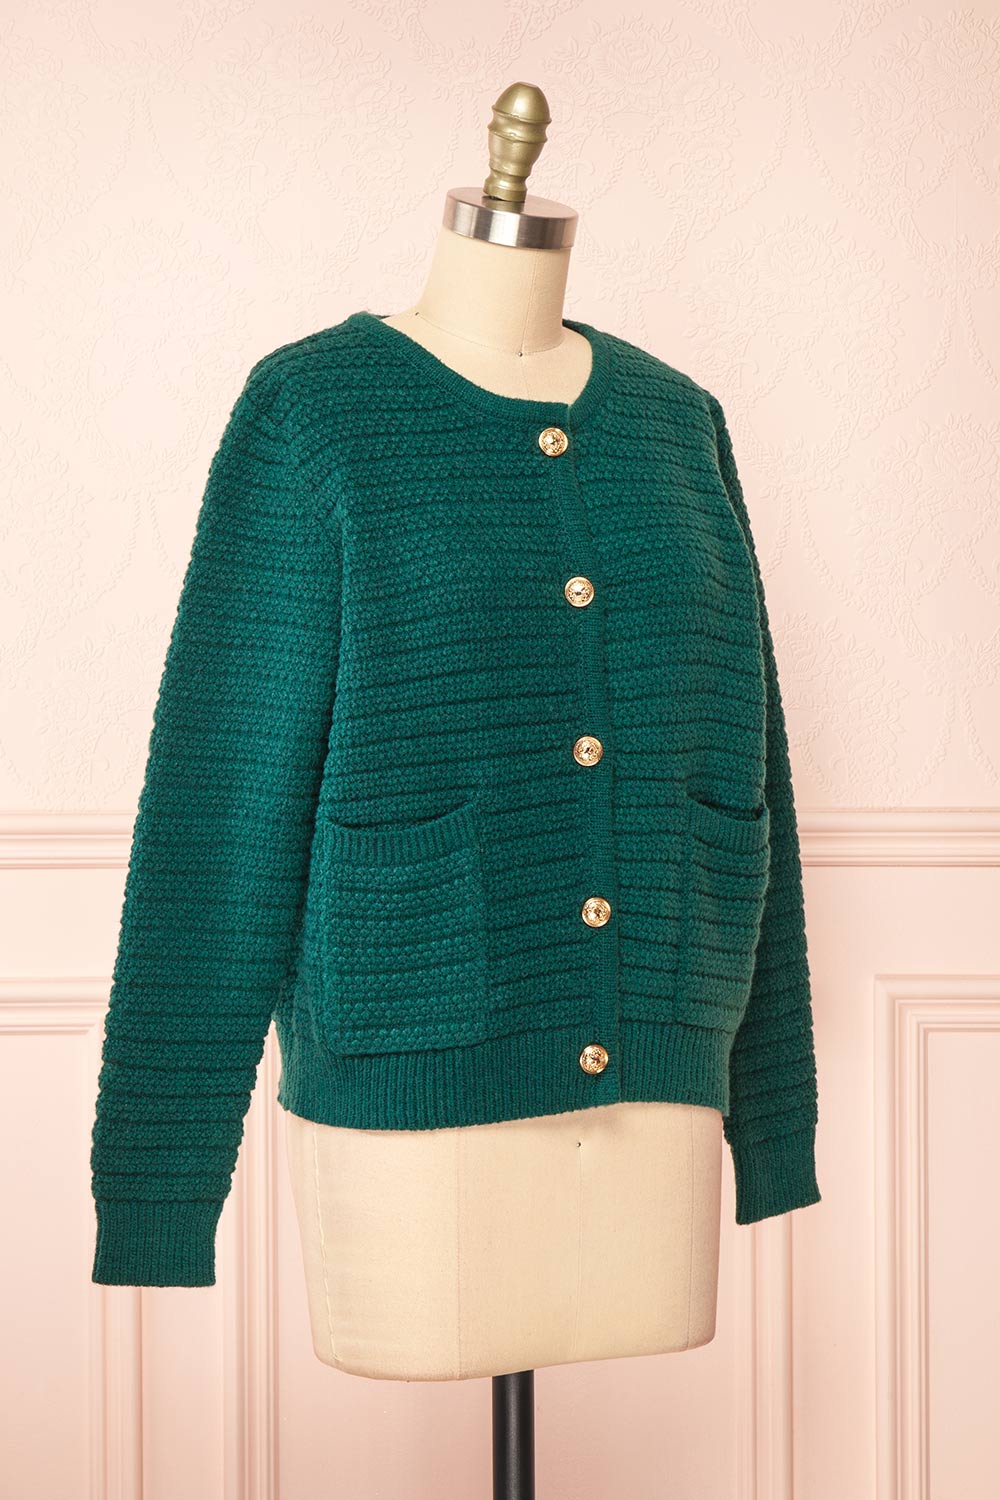 Suzie Green Oversized Knit Cardigan | Boutique 1861 side view